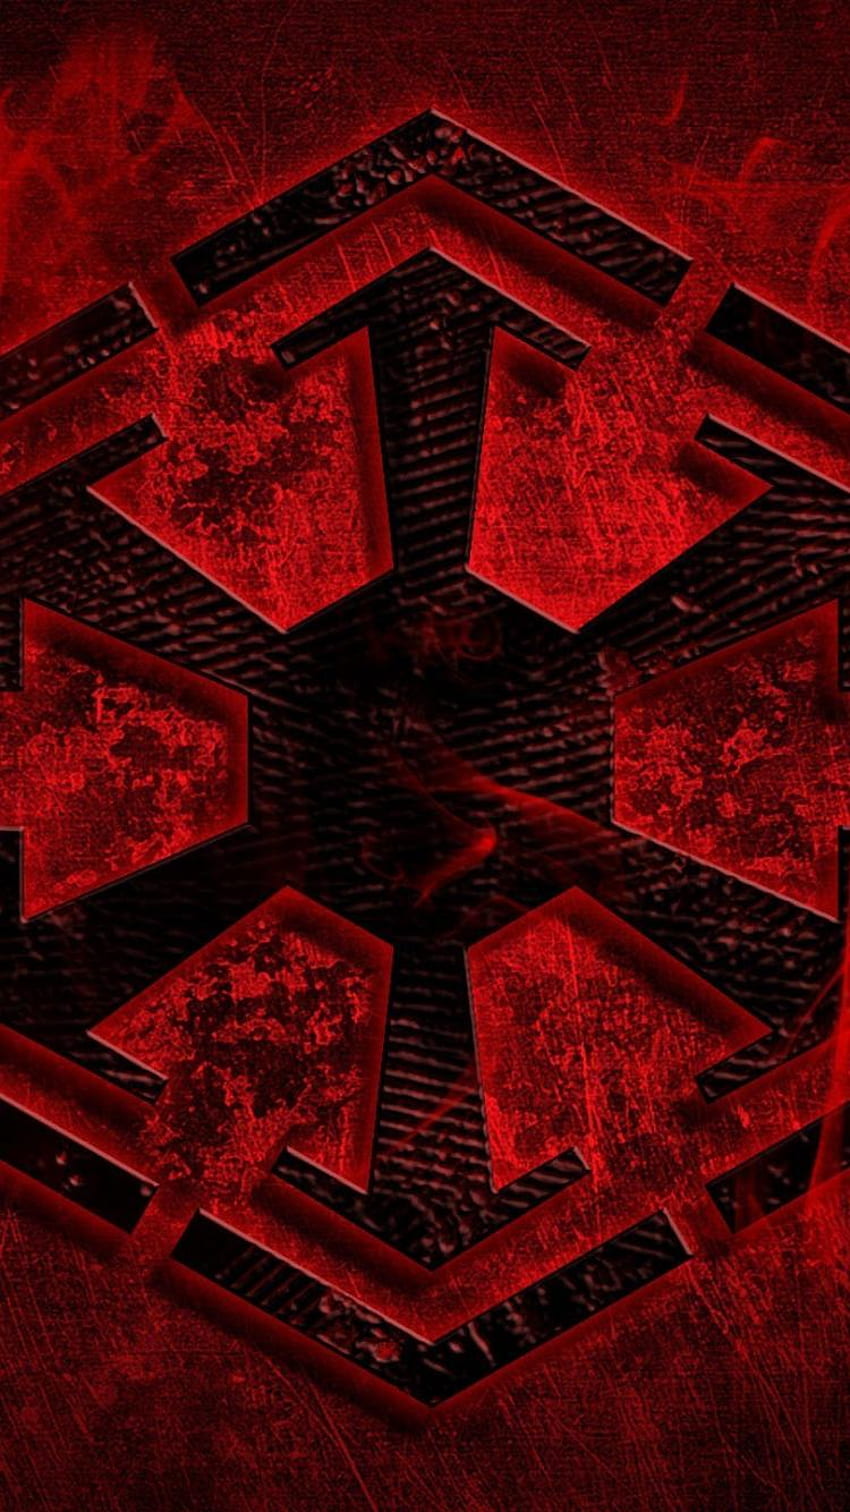 sith iphone wallpaper